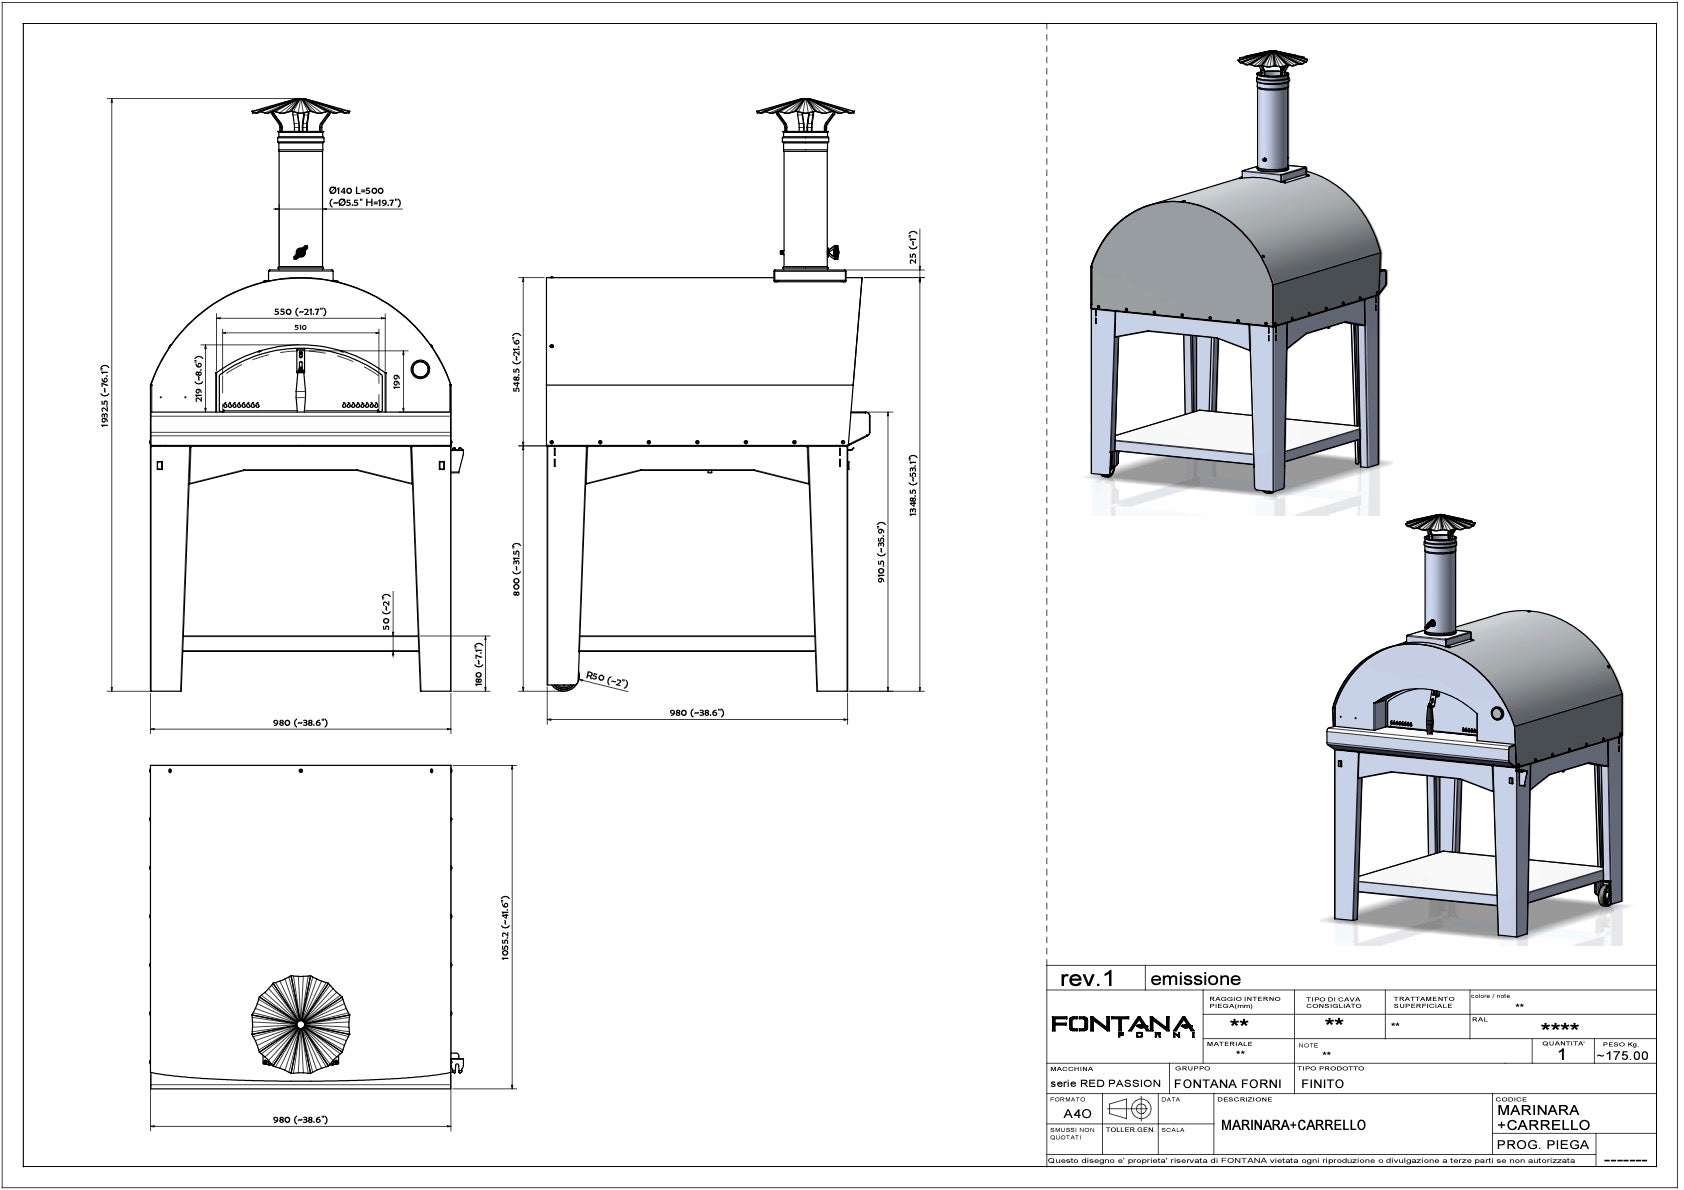 Fontana Marinara Stainless Steel Wood Pizza Oven Including Trolley